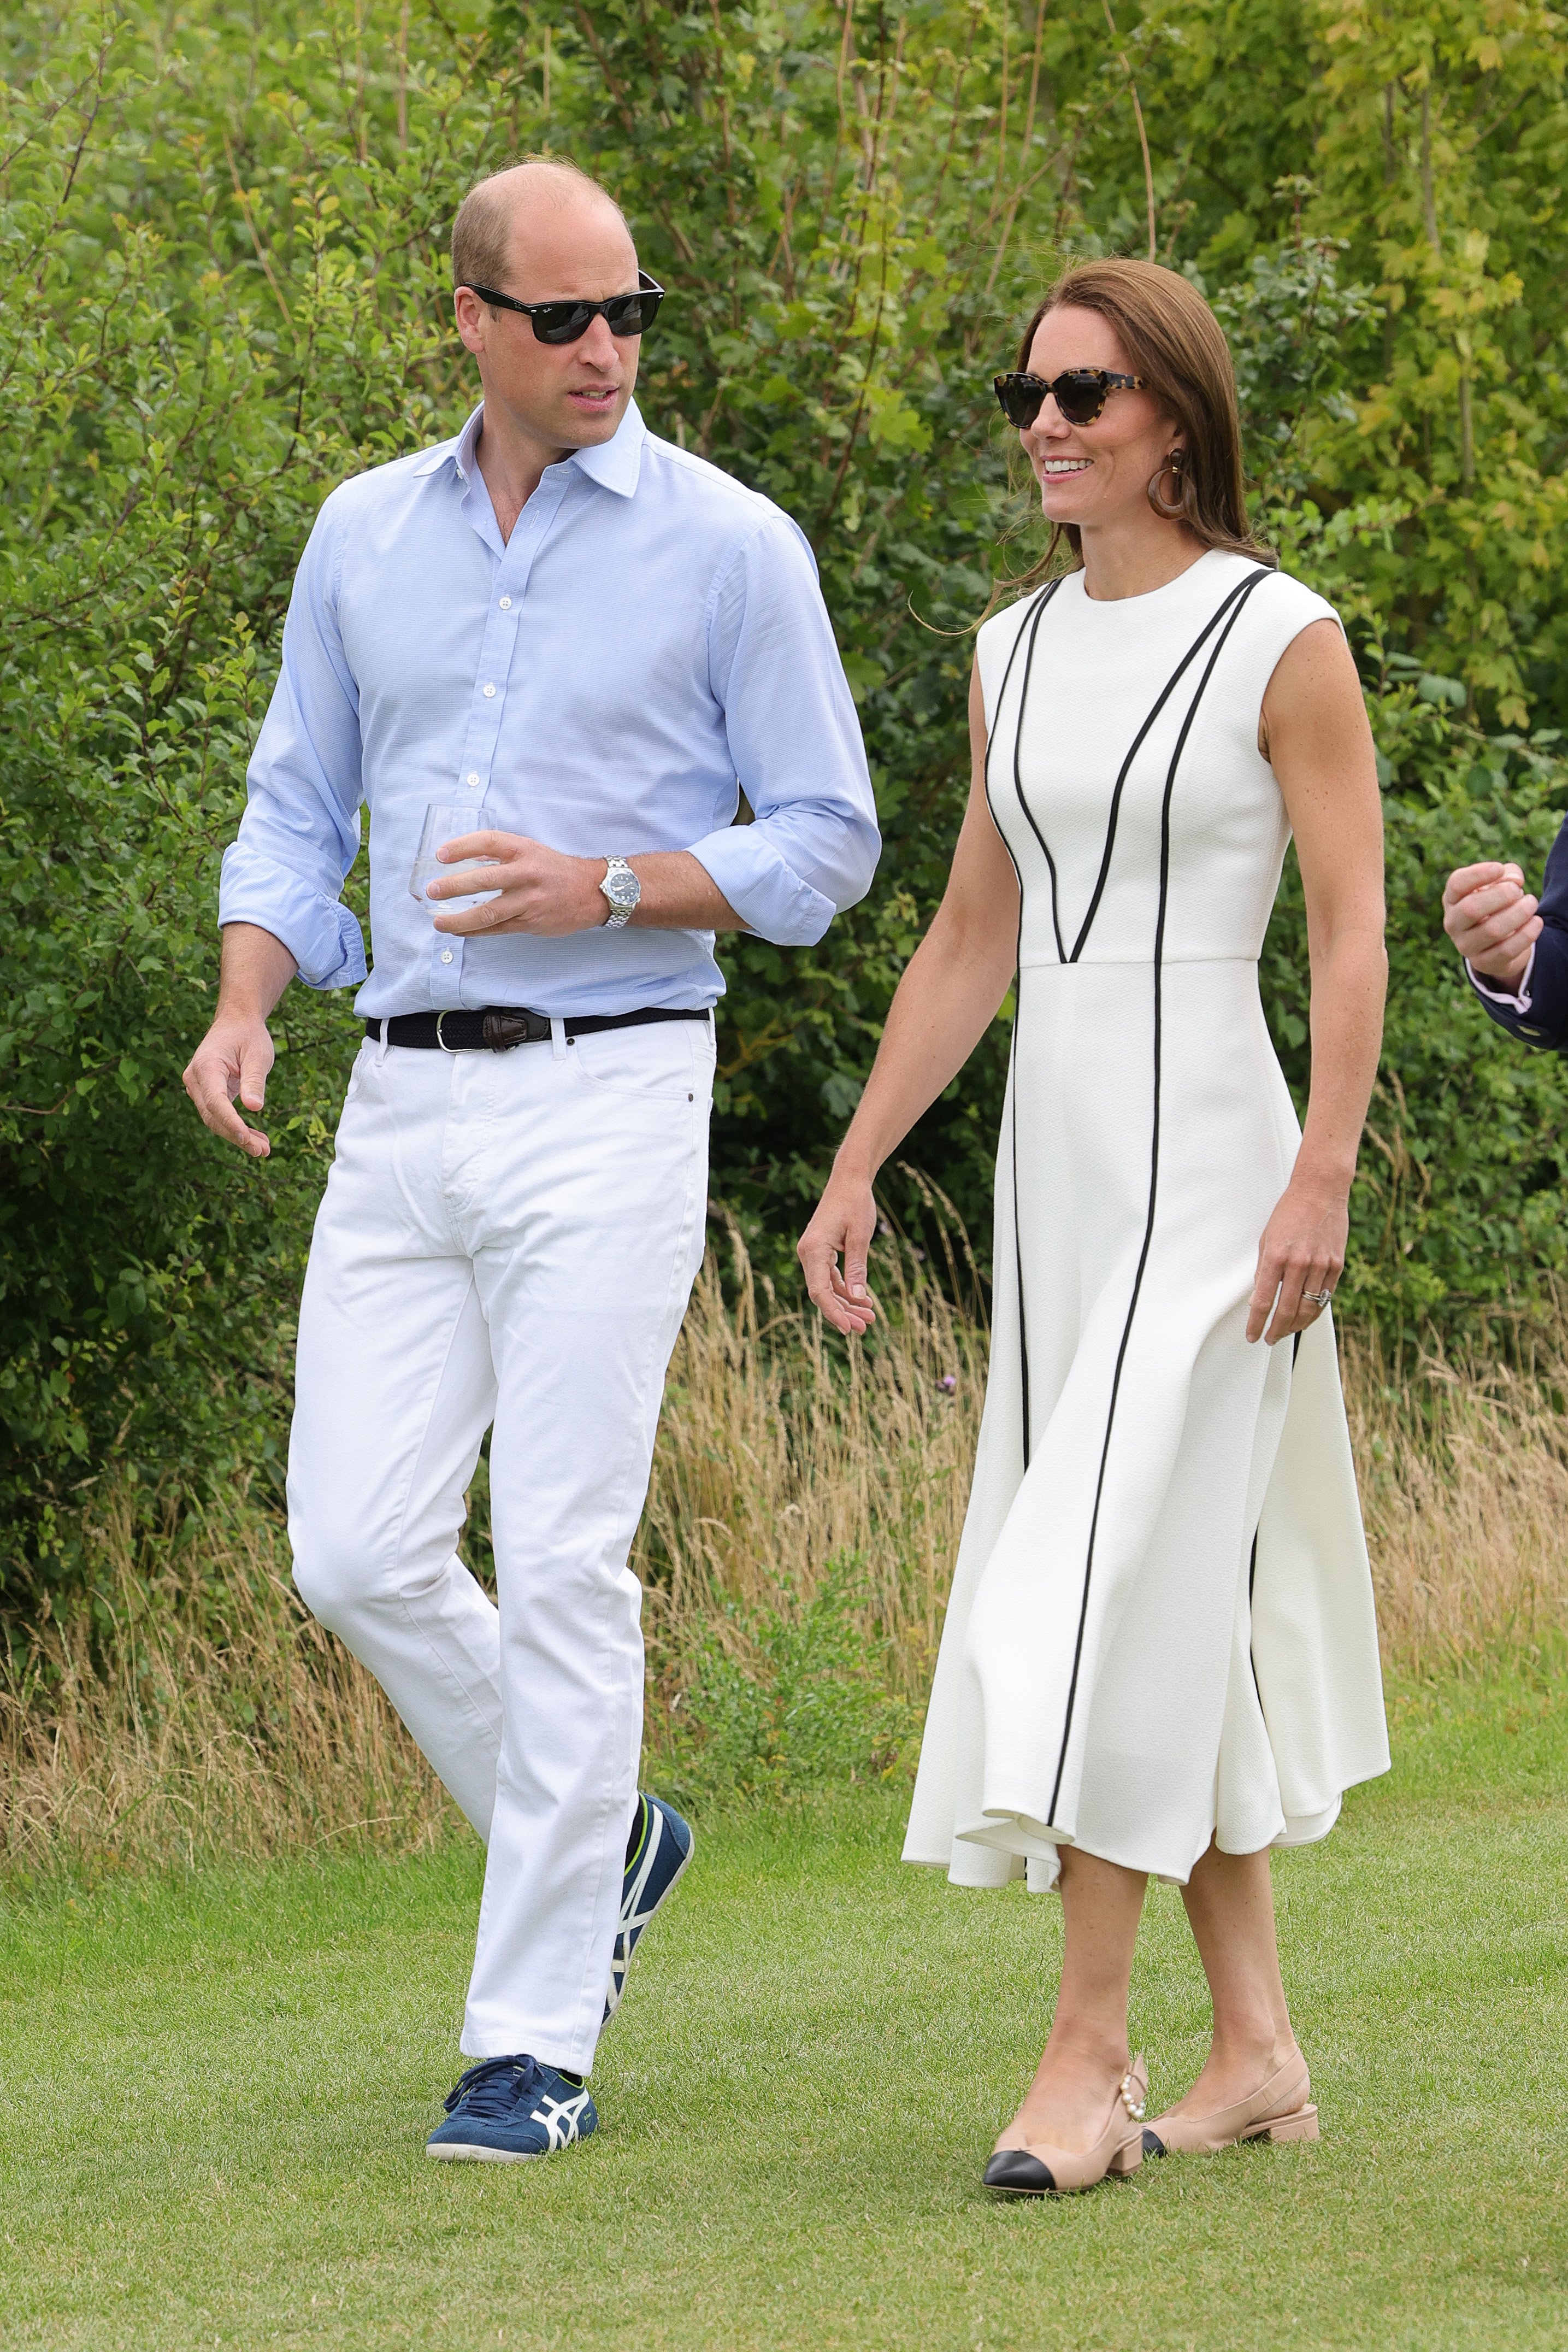 Prince William, Duke of Cambridge, and Catherine, Duchess of Cambridge arrive for the Royal Charity Polo Cup 2022 at Guards Polo Club during the Outsourcing Inc. Royal Polo Cup at Guards Polo Club, Flemish Farm on July 06, 2022, in Windsor, England. | Source: Getty Images